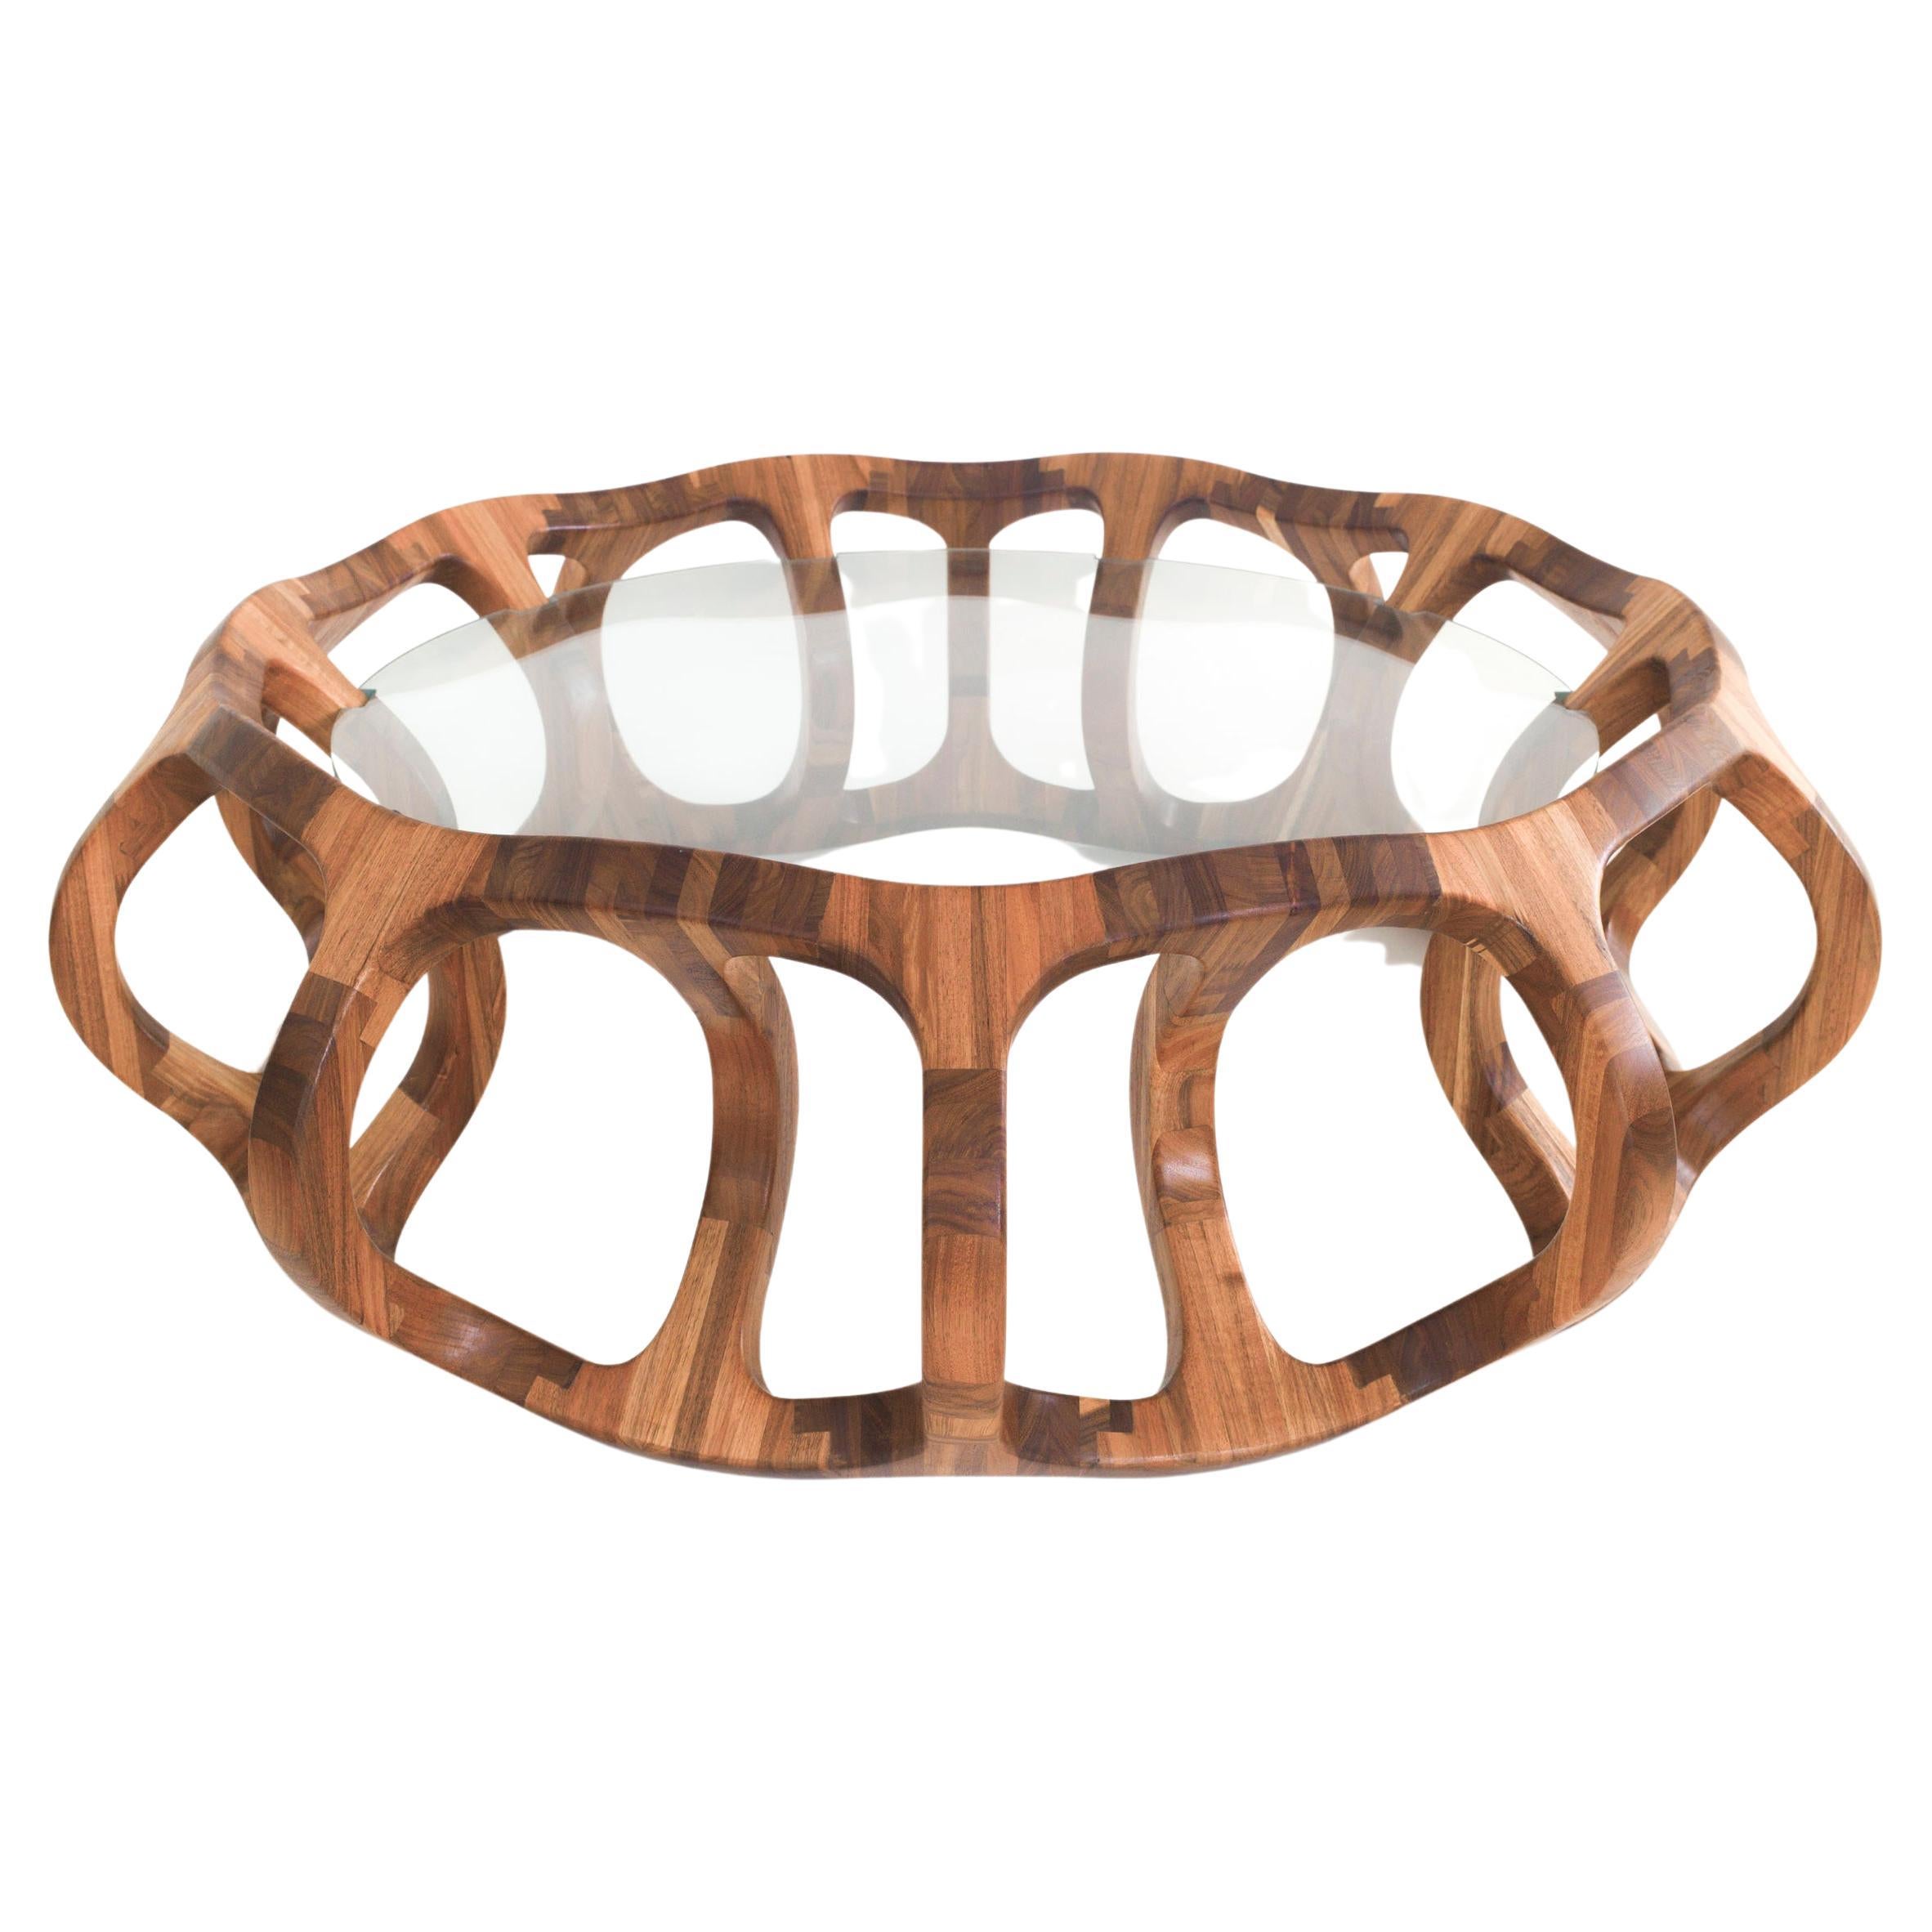 Toro G10, Sculptural Center Table Made of Solid Wood by Pedro Cerisola